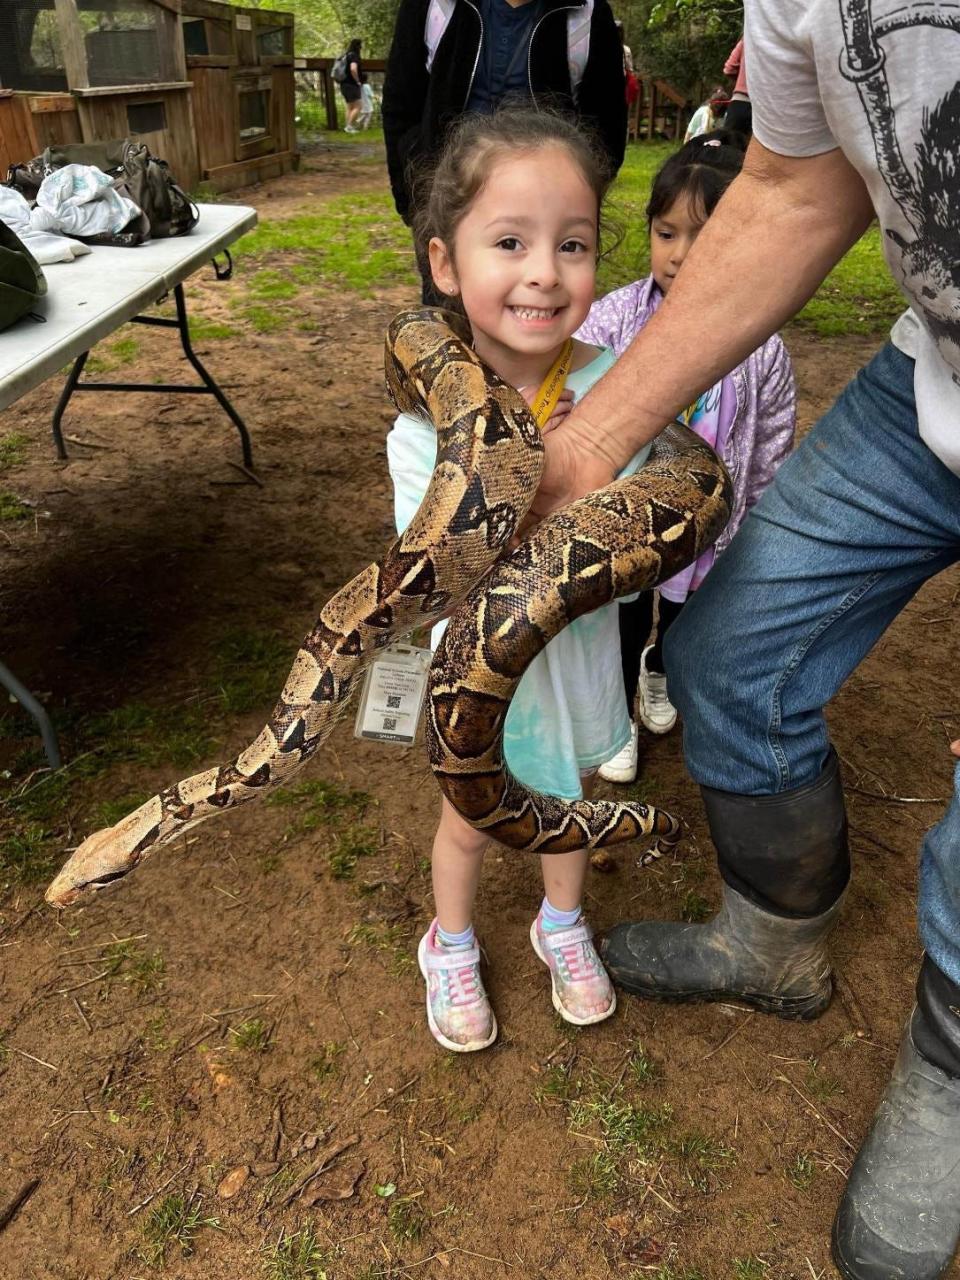 Diana Limon, Victoria Limon's daughter, had her picture taken with a boa constrictor at the Capital of Texas Zoo during the March 22 field trip before the bus crash that afternoon.